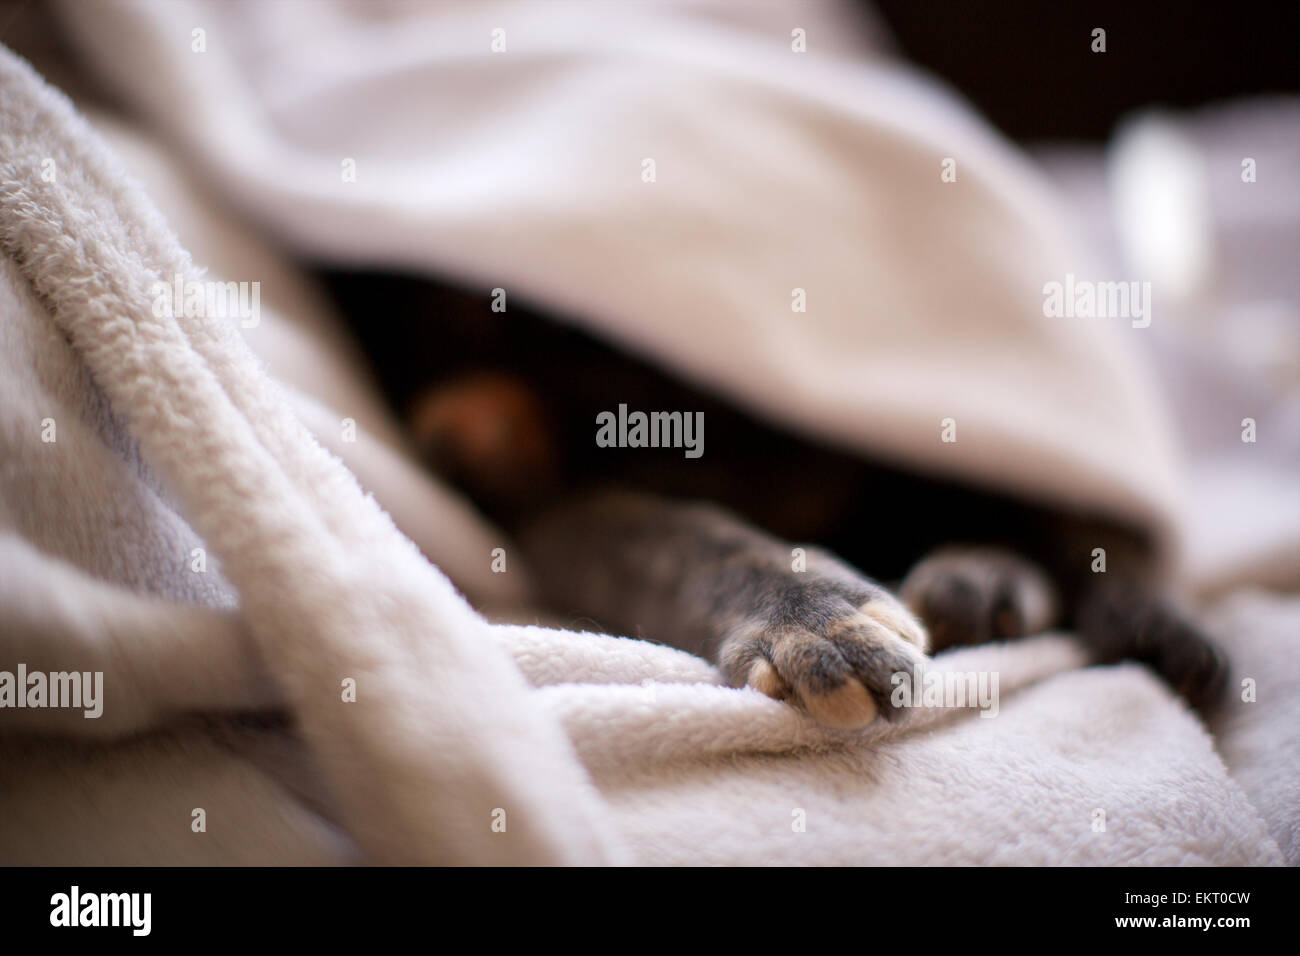 Domestic cat in the home, sleeping under dressing gown with just paws exposed Stock Photo